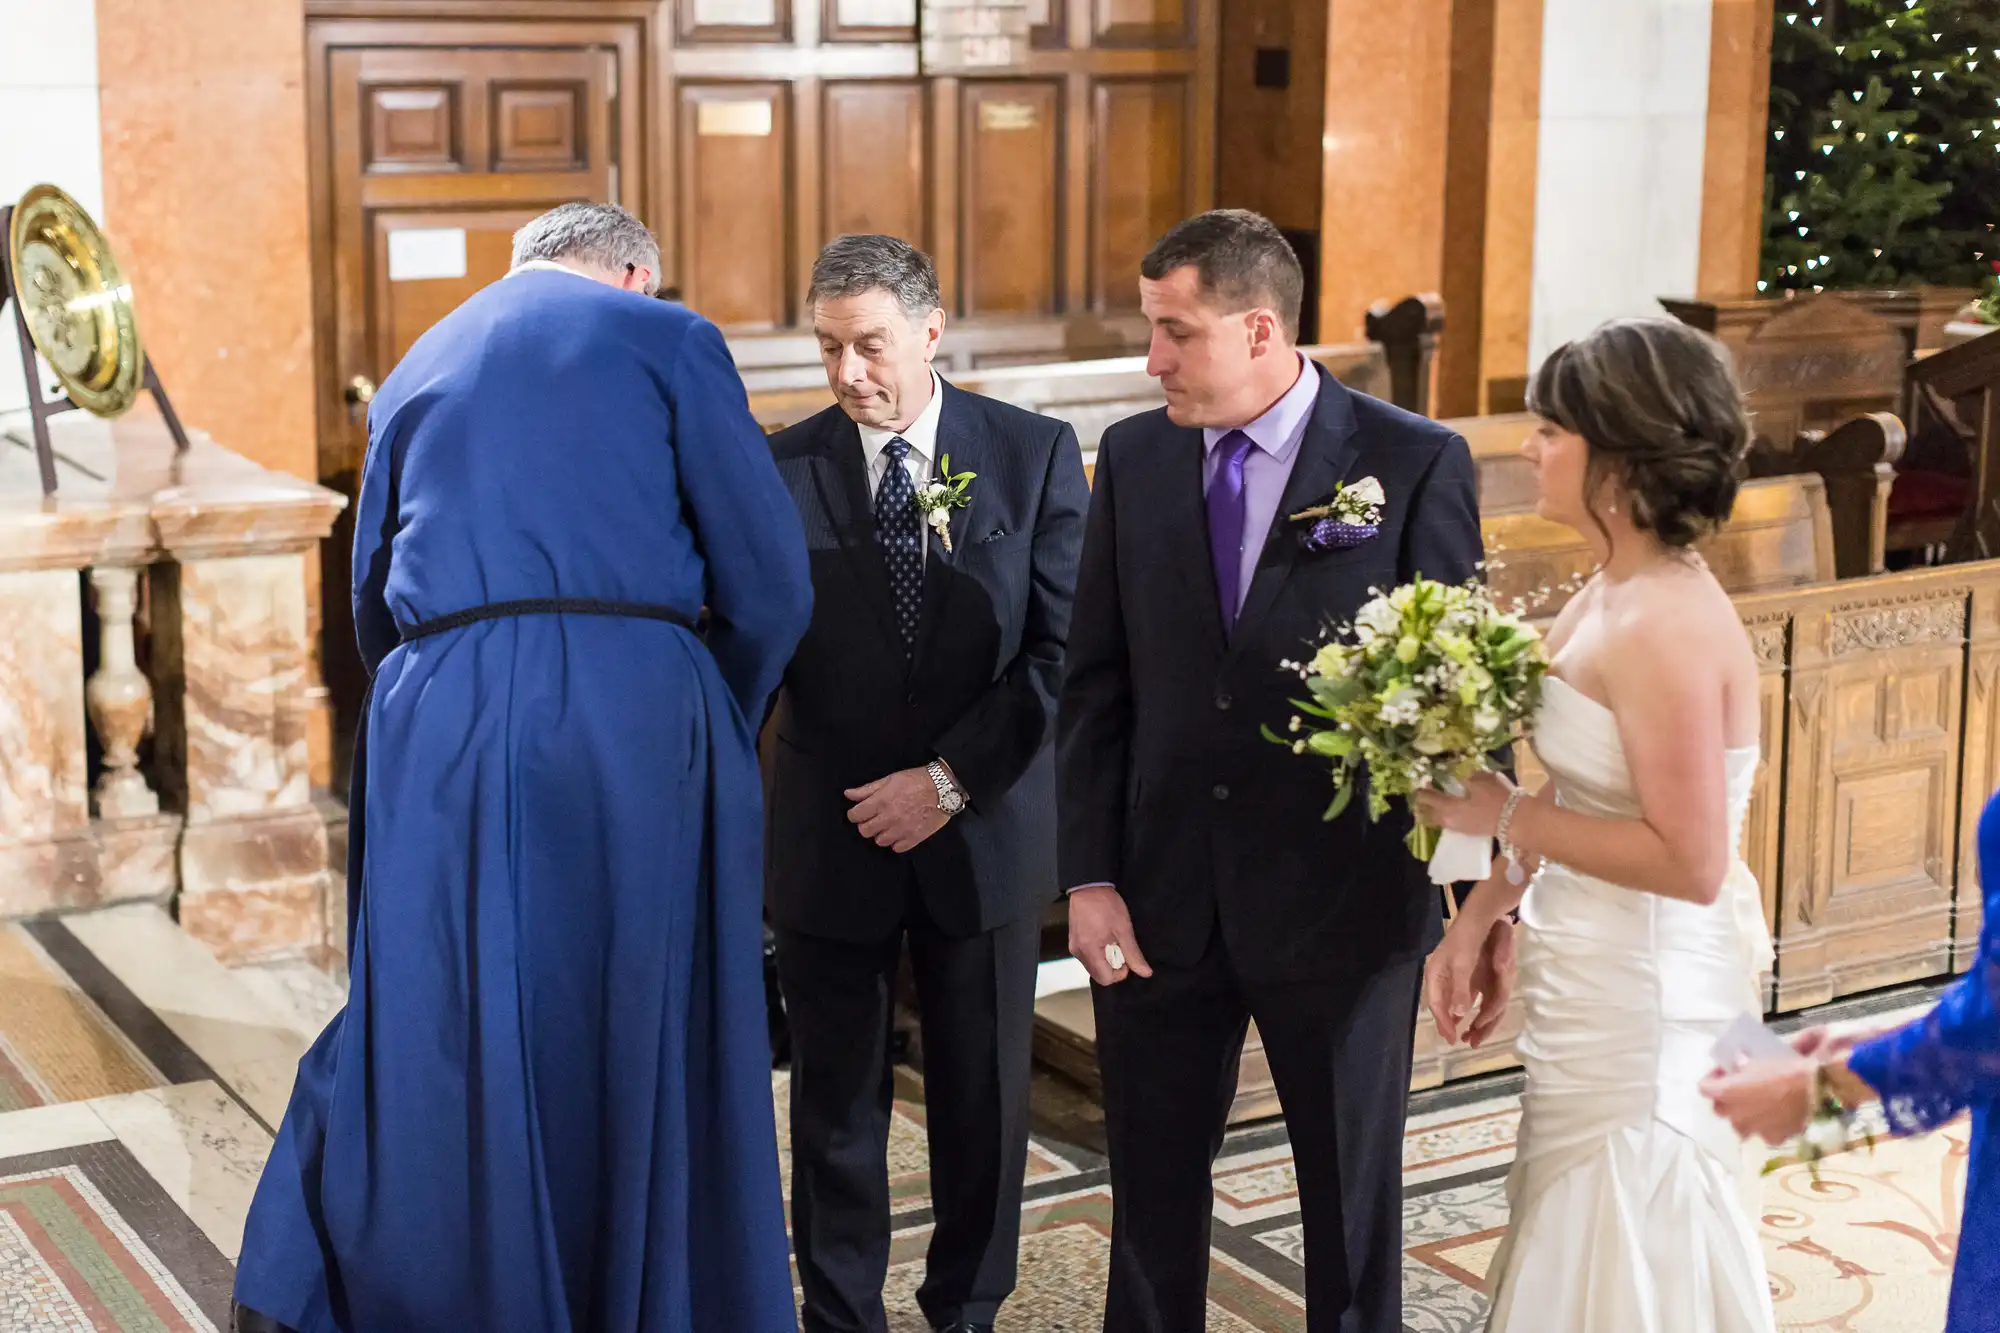 A priest performs a wedding ceremony in a church, standing in front of a groom and best man, with the bride holding a bouquet to the side.